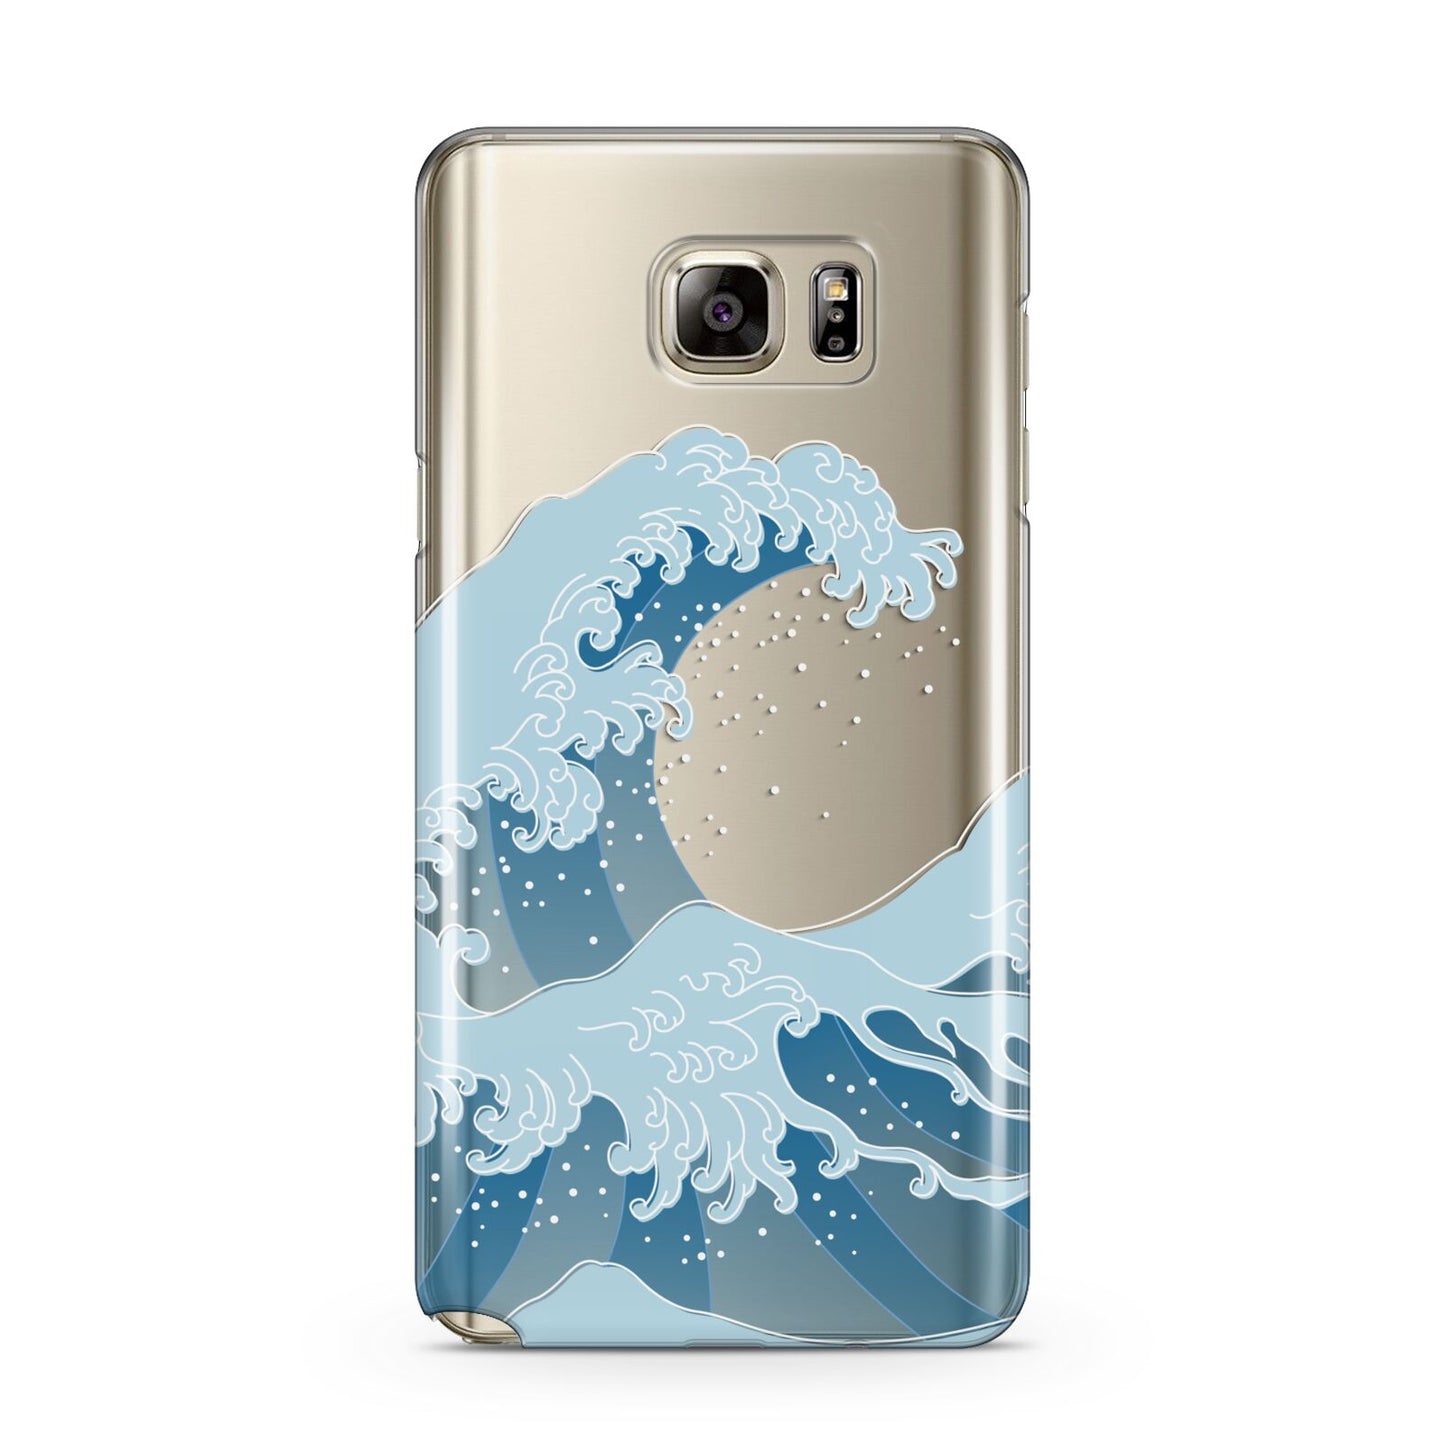 Great Wave Illustration Samsung Galaxy Note 5 Case